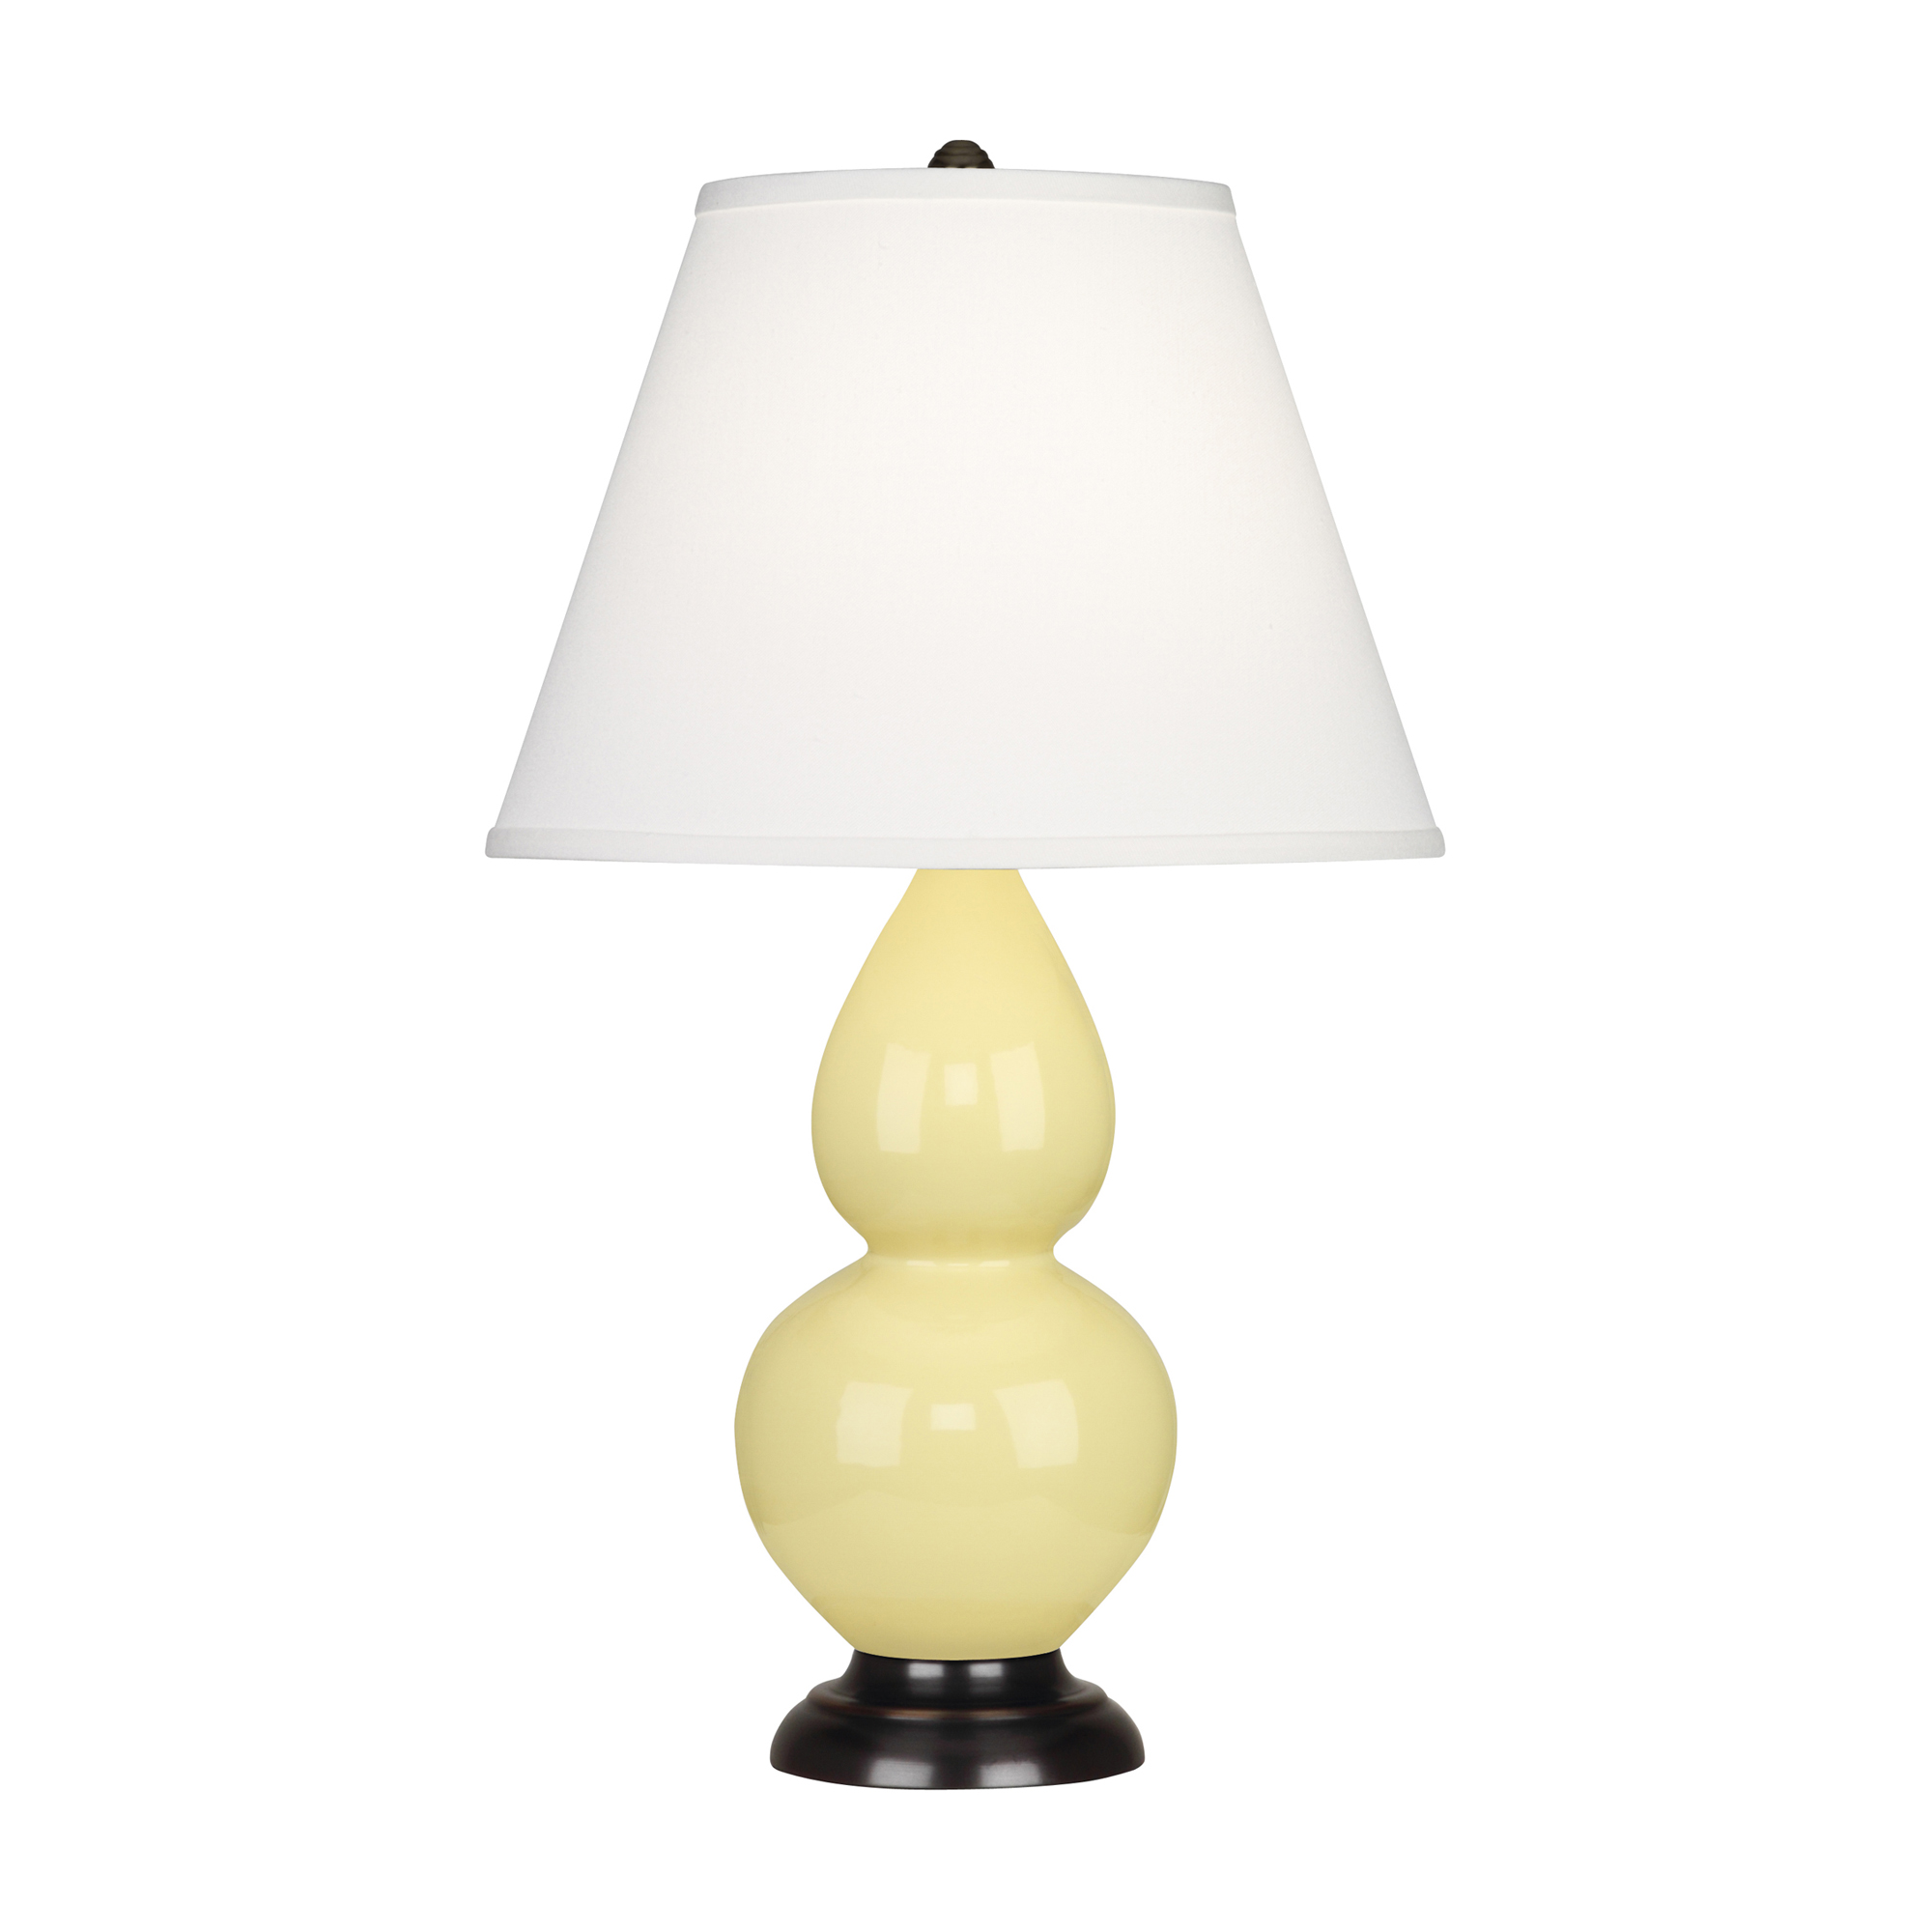 Small Double Gourd Accent Lamp Style #1615X